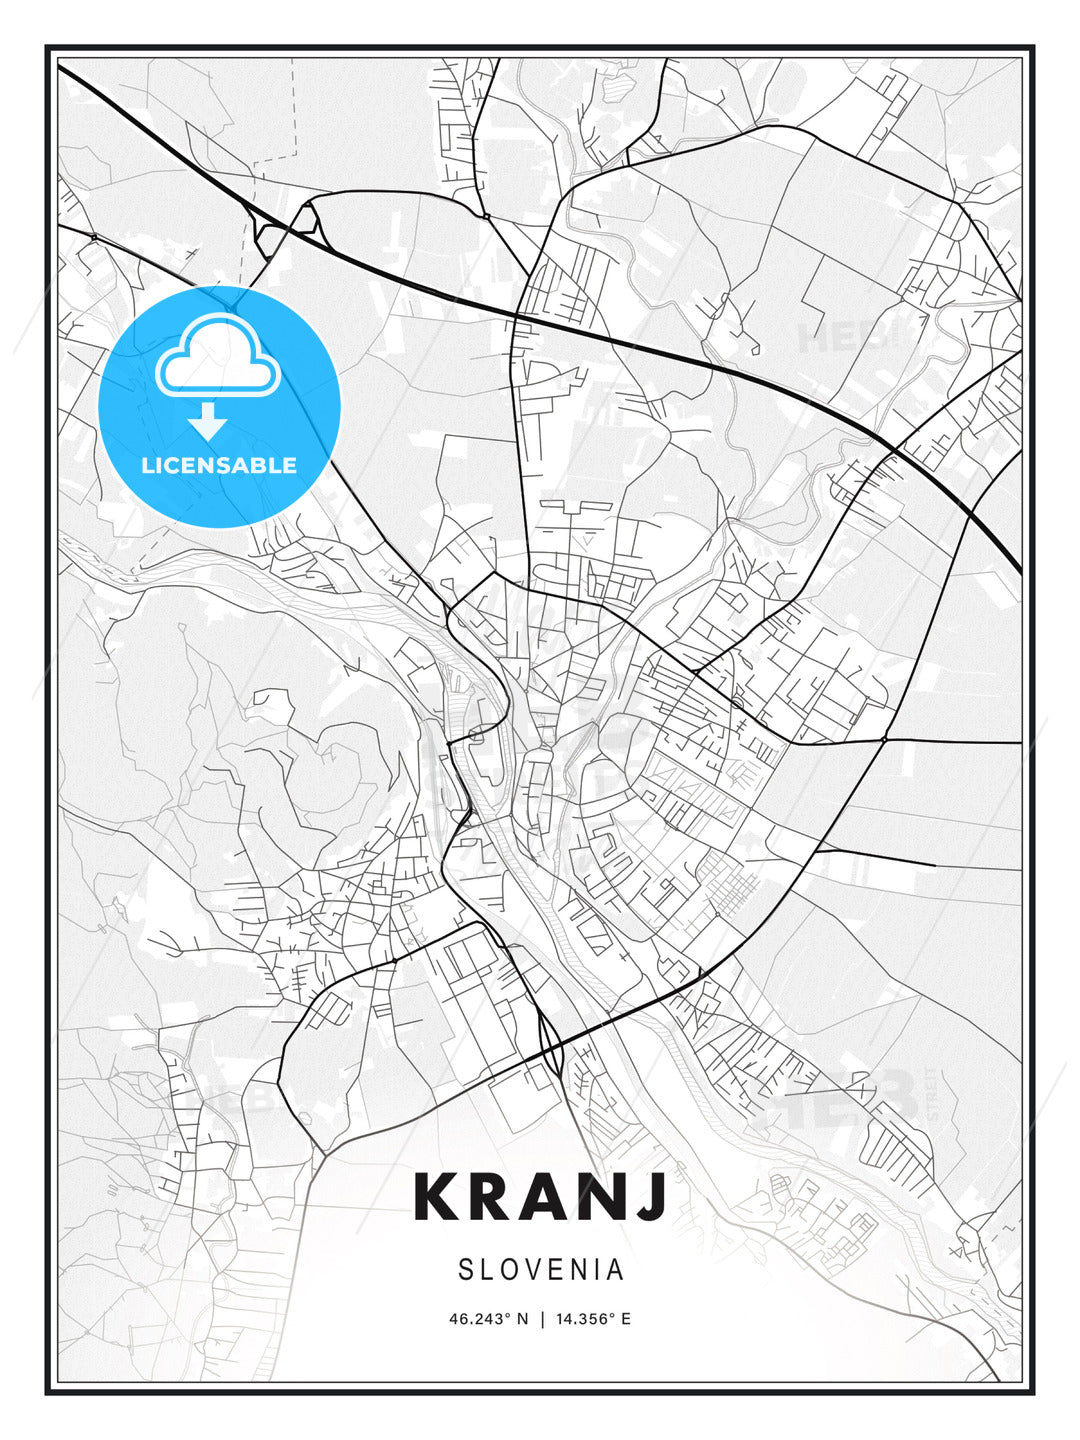 Kranj, Slovenia, Modern Print Template in Various Formats - HEBSTREITS Sketches